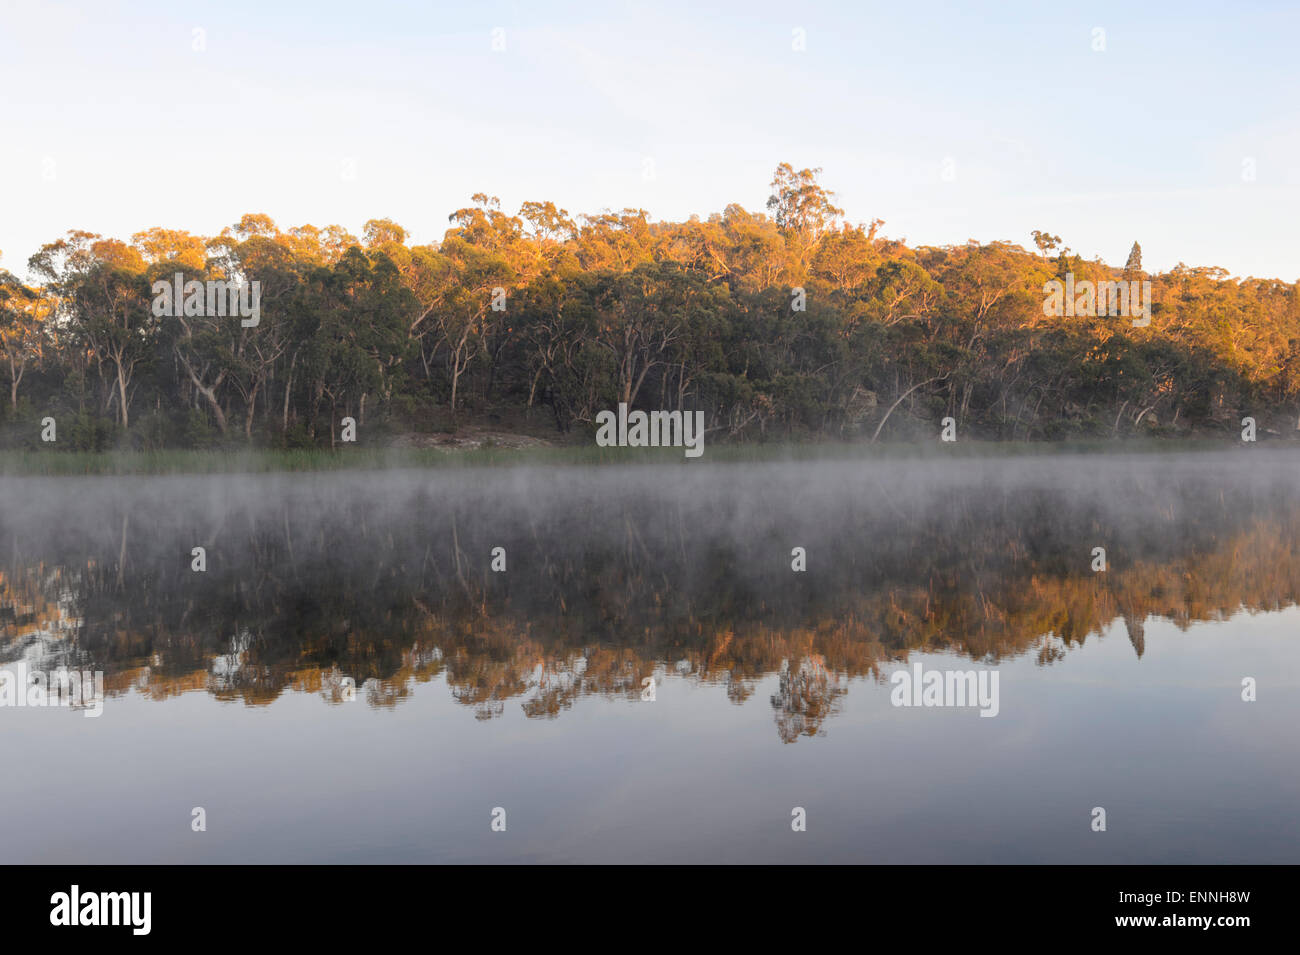 Dunns Swamp, Wollemi National Park, New South Wales, NSW, Australia Stock Photo